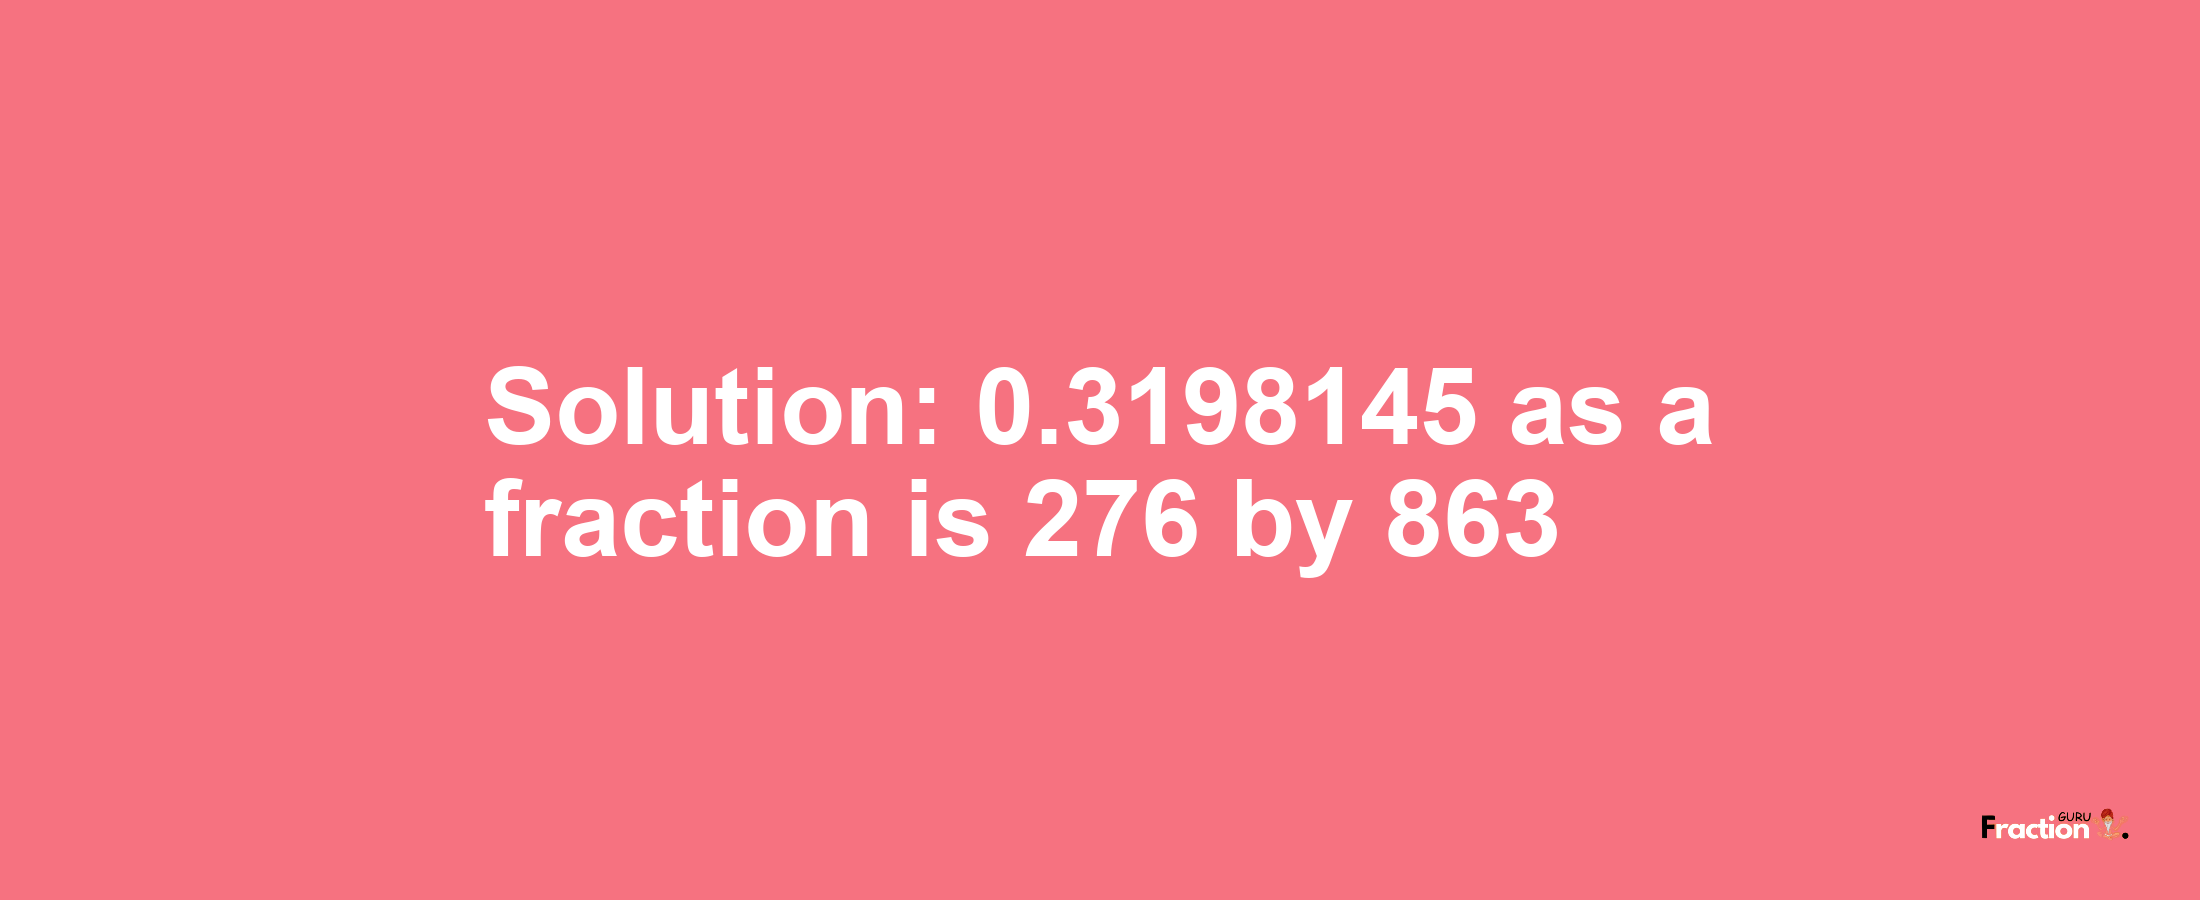 Solution:0.3198145 as a fraction is 276/863